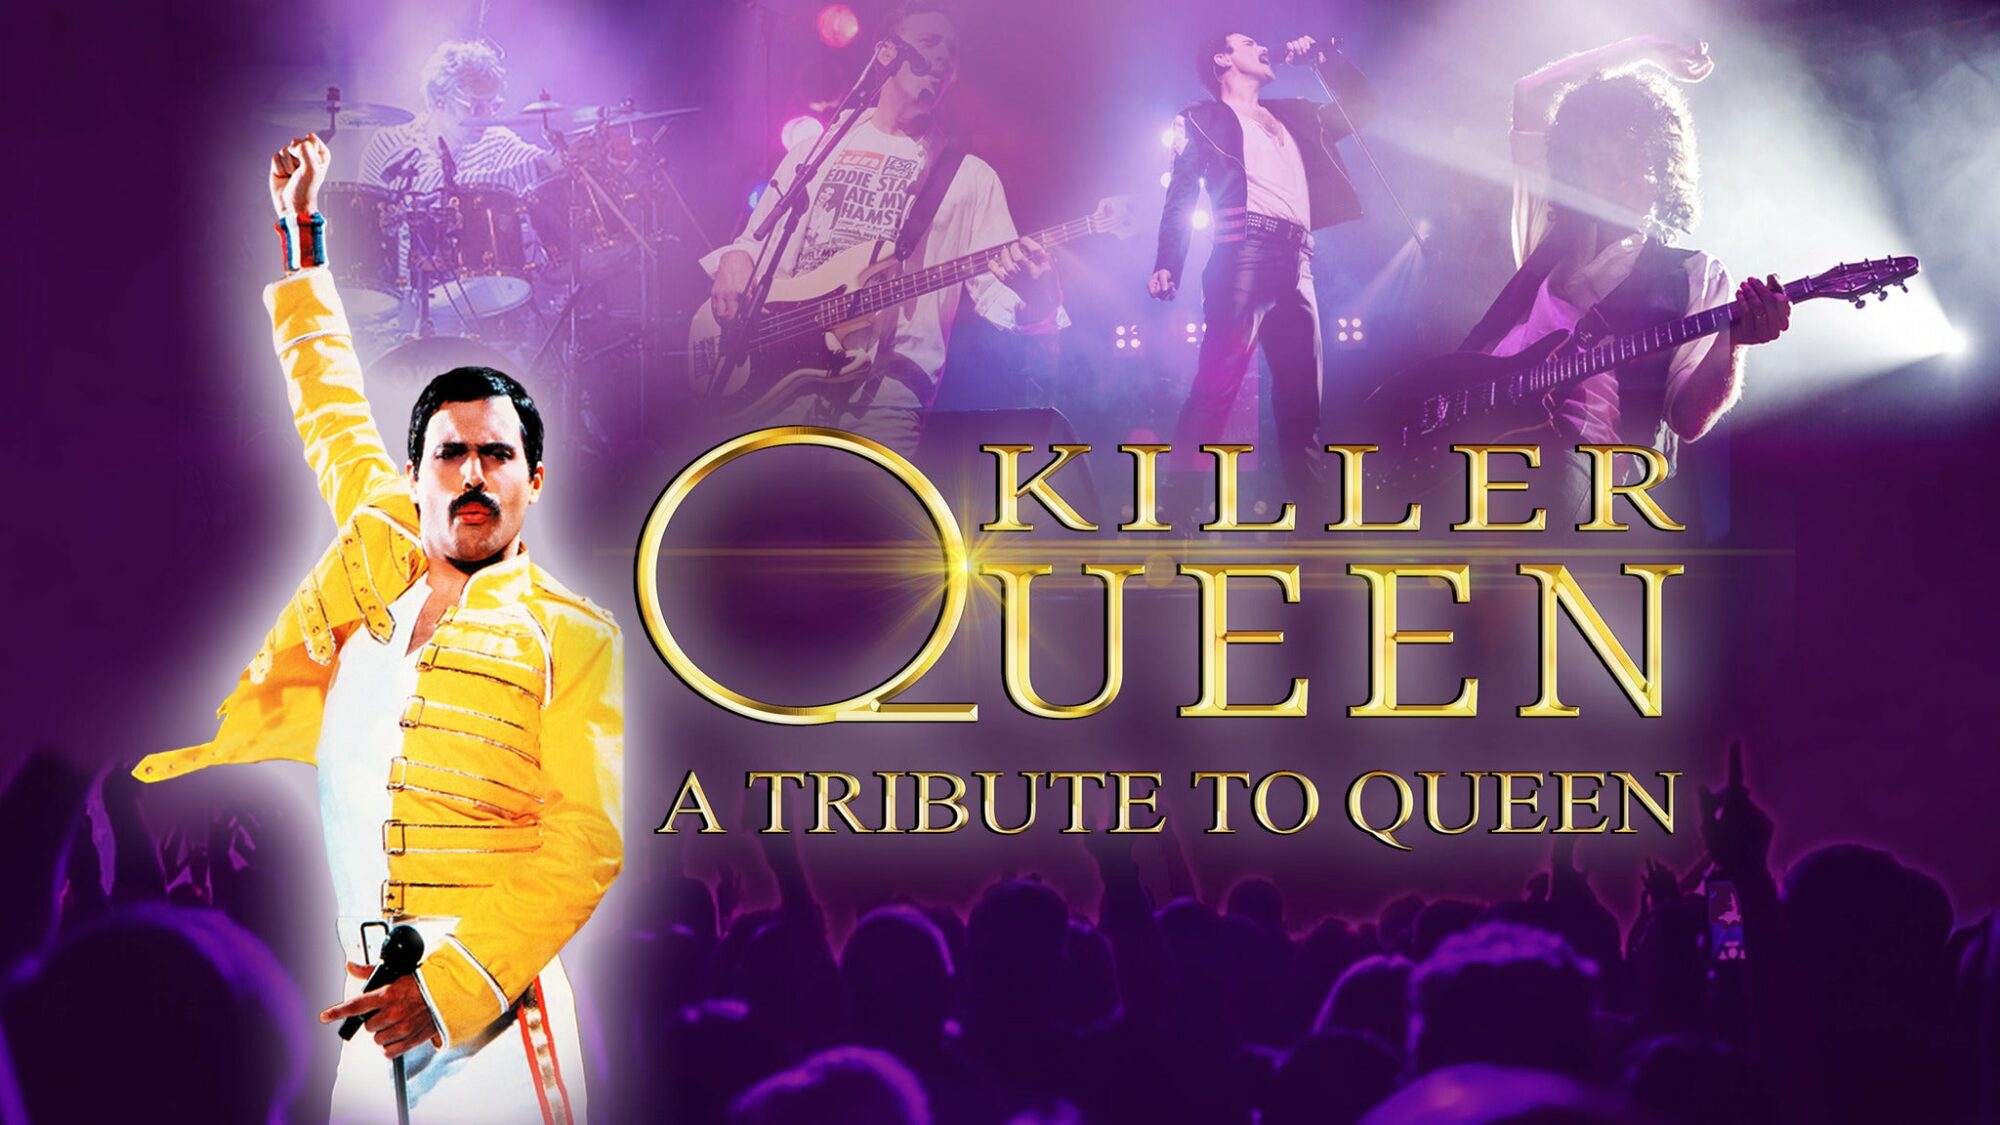 Image name Killer Queen at Sheffield City Hall Oval Hall Sheffield the 3 image from the post Killer Queen at Scarborough Spa Grand Hall, Scarborough in Yorkshire.com.